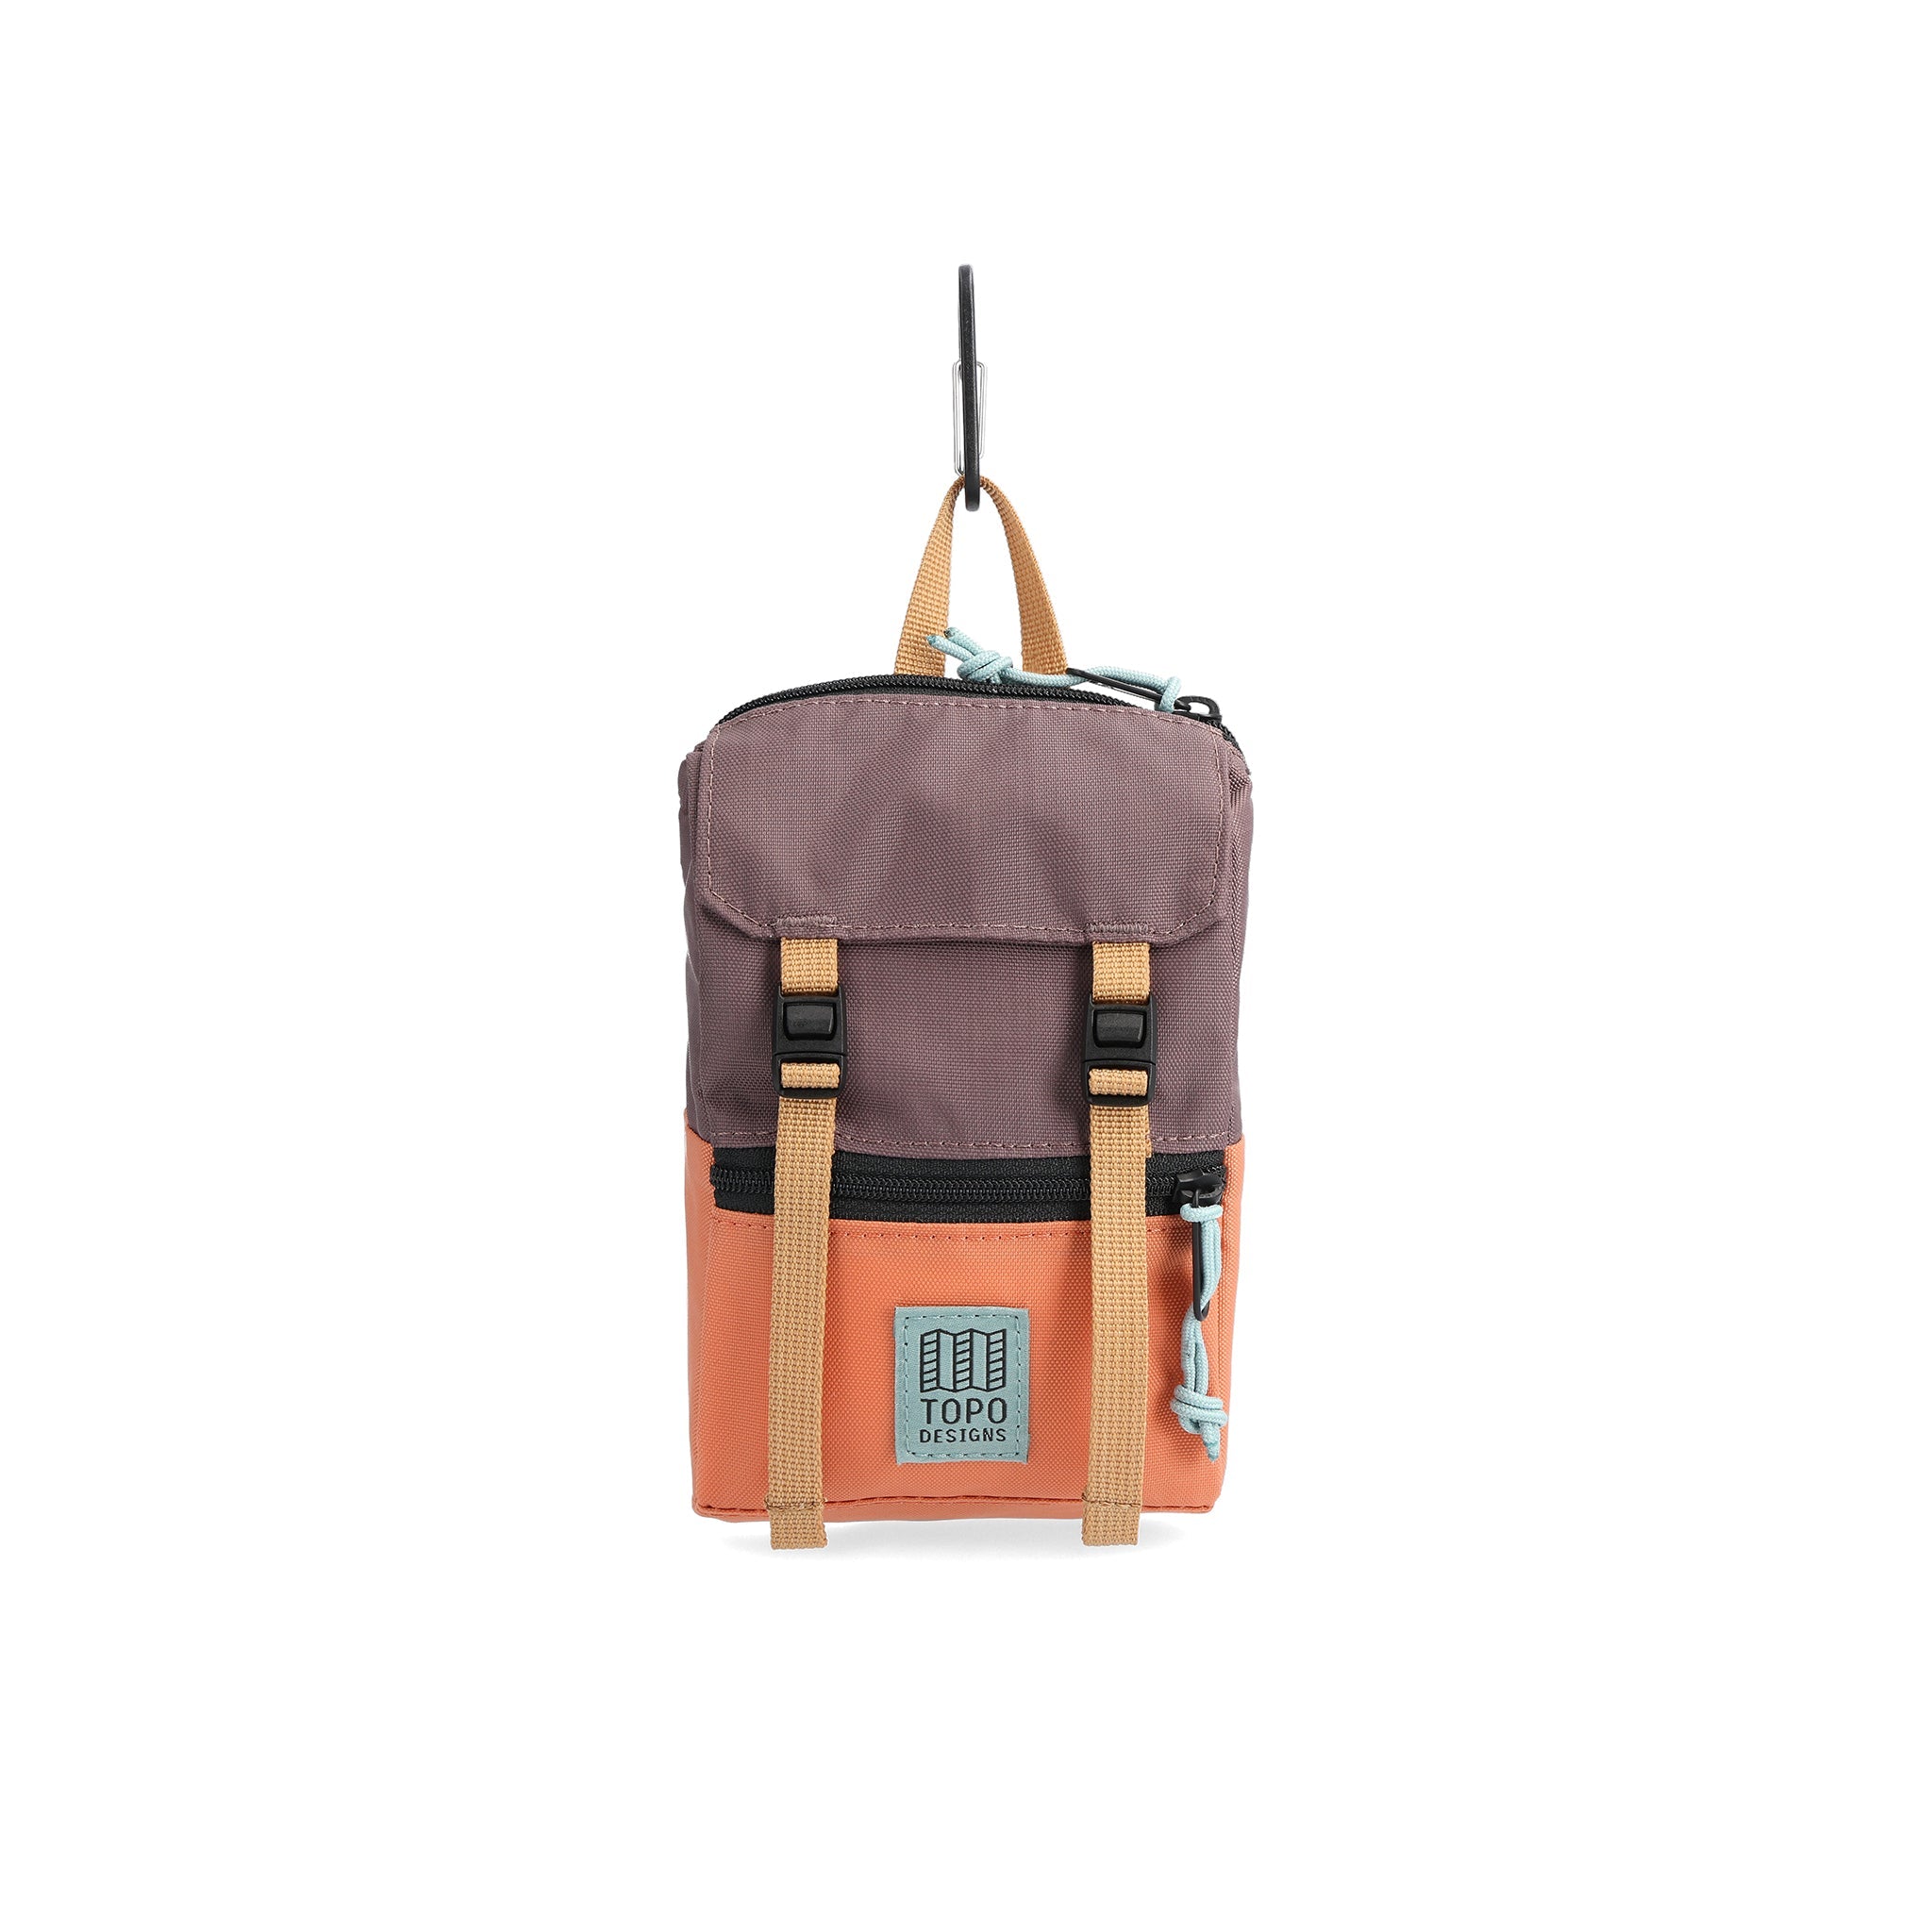 Front View of Topo Designs Rover Pack Micro in "Coral / Peppercorn"